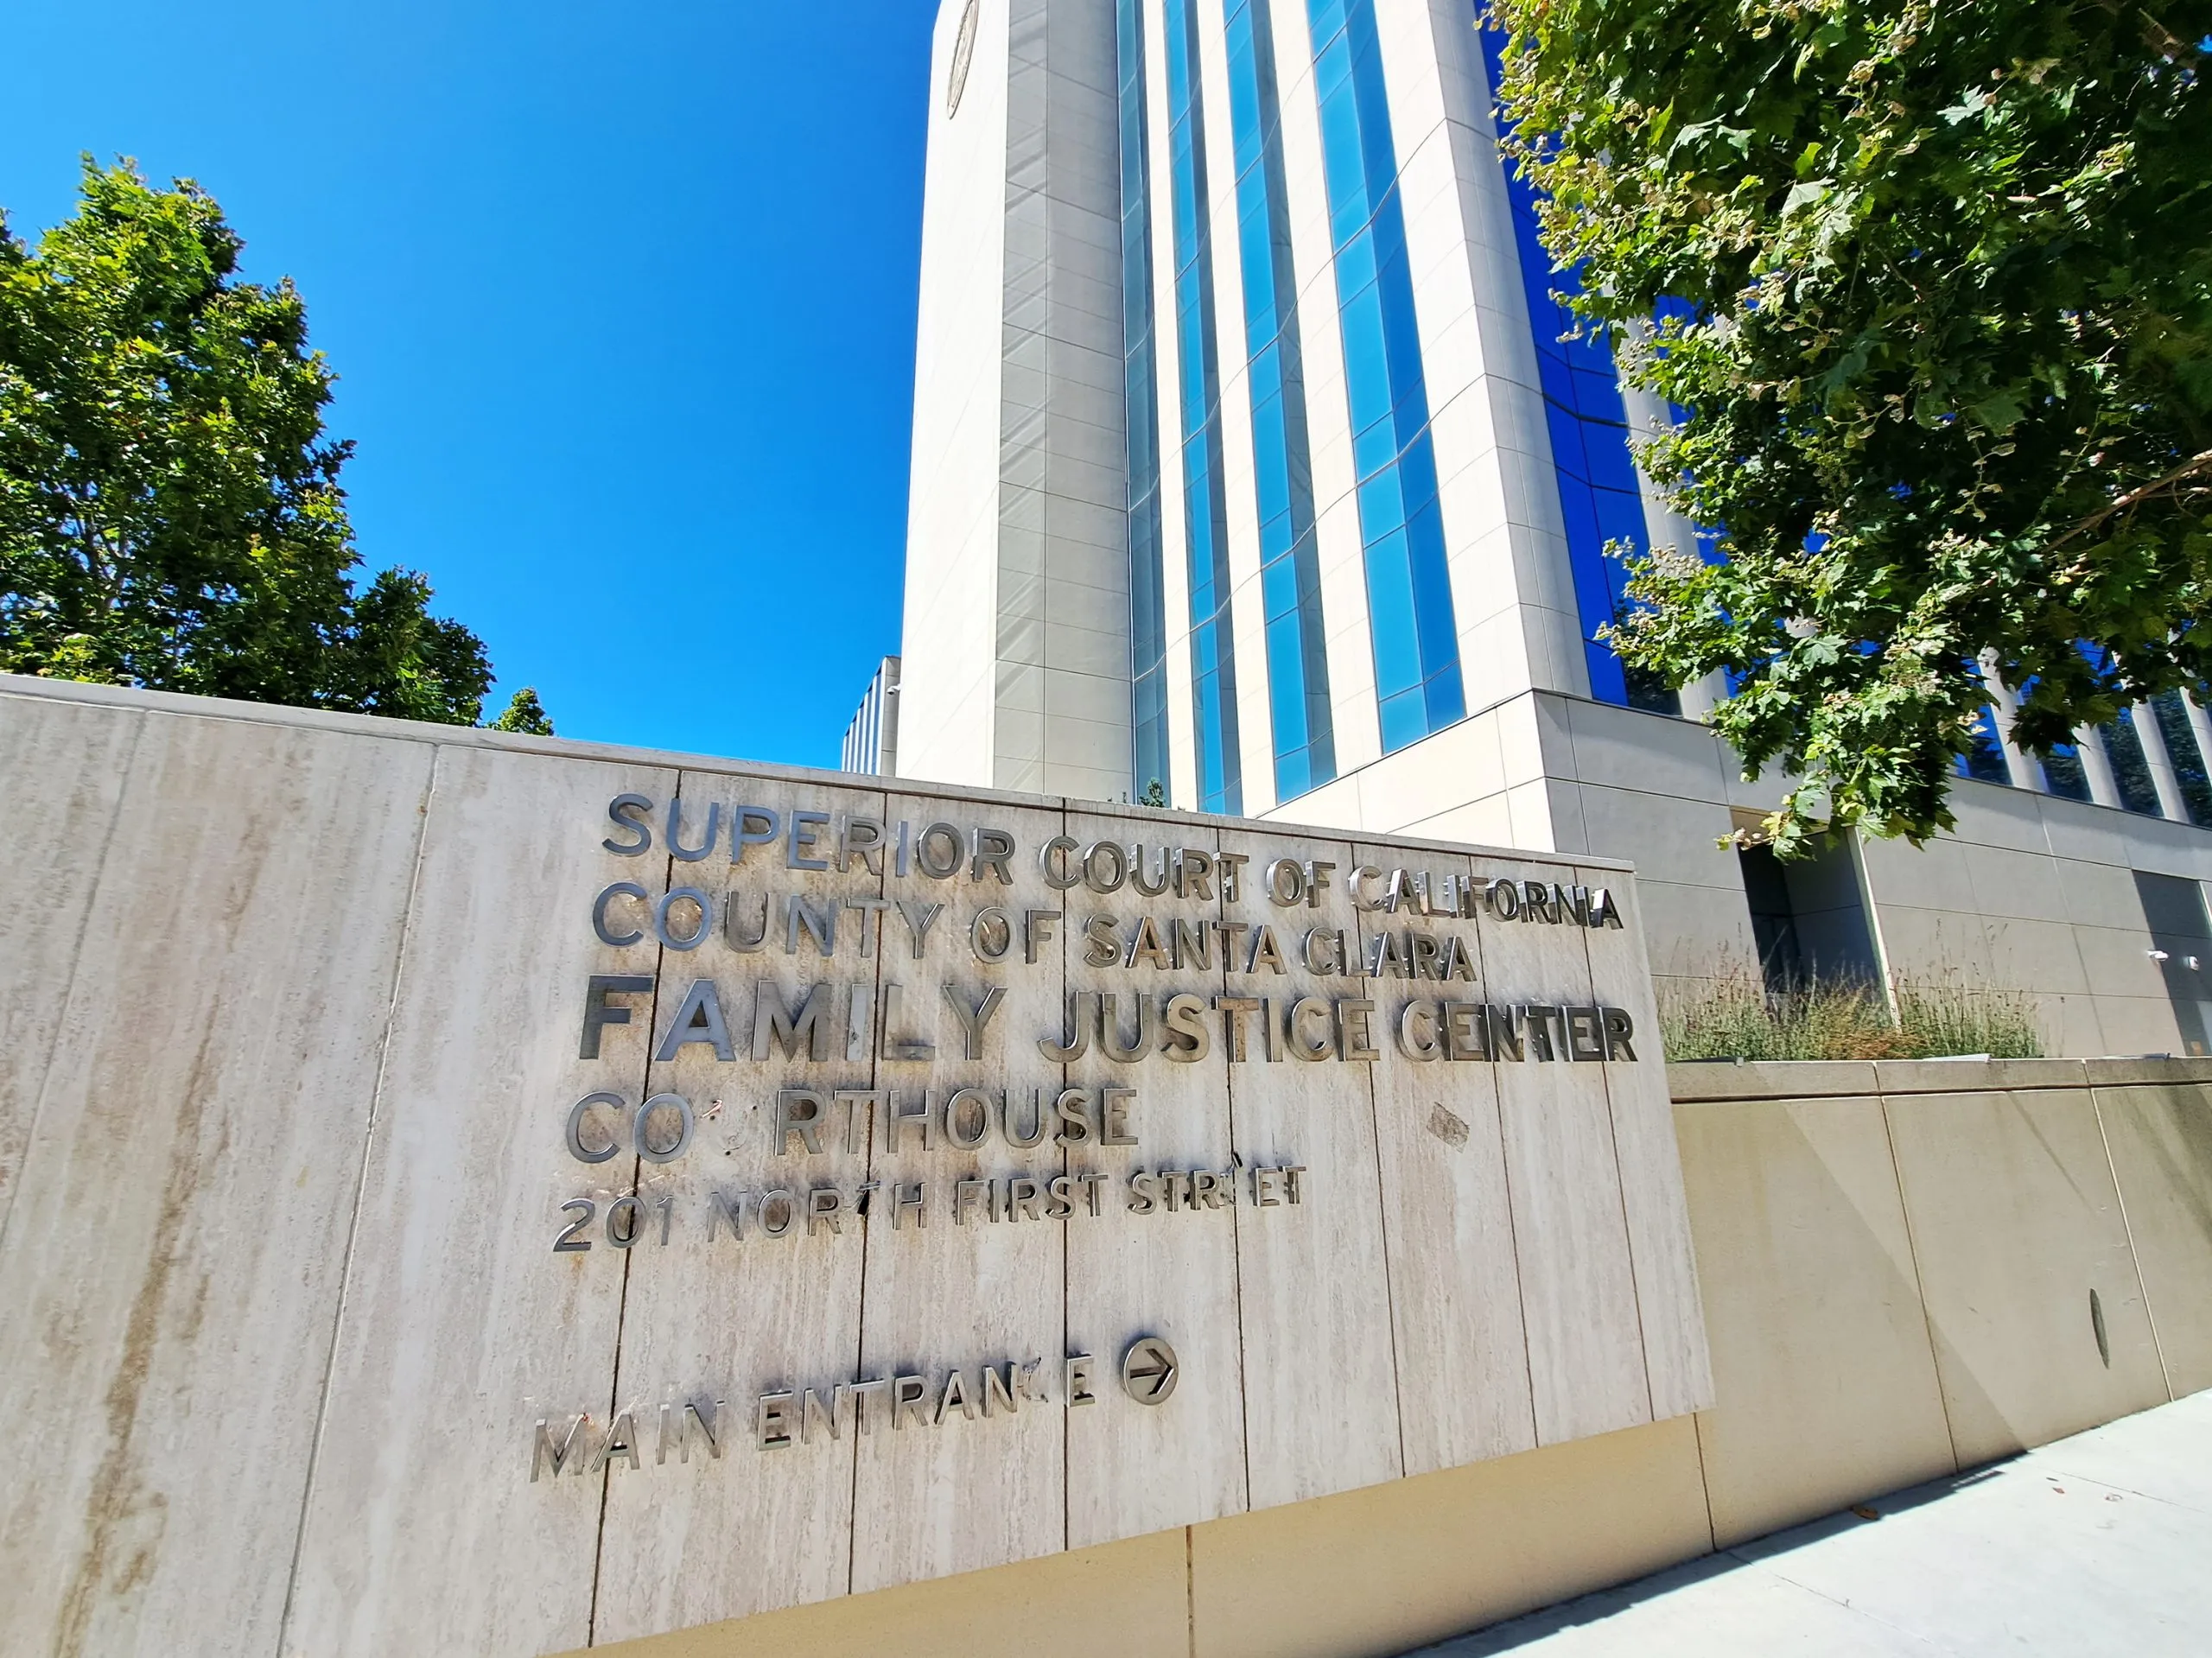 Extended power outage at Santa Clara County family court leads to frustration